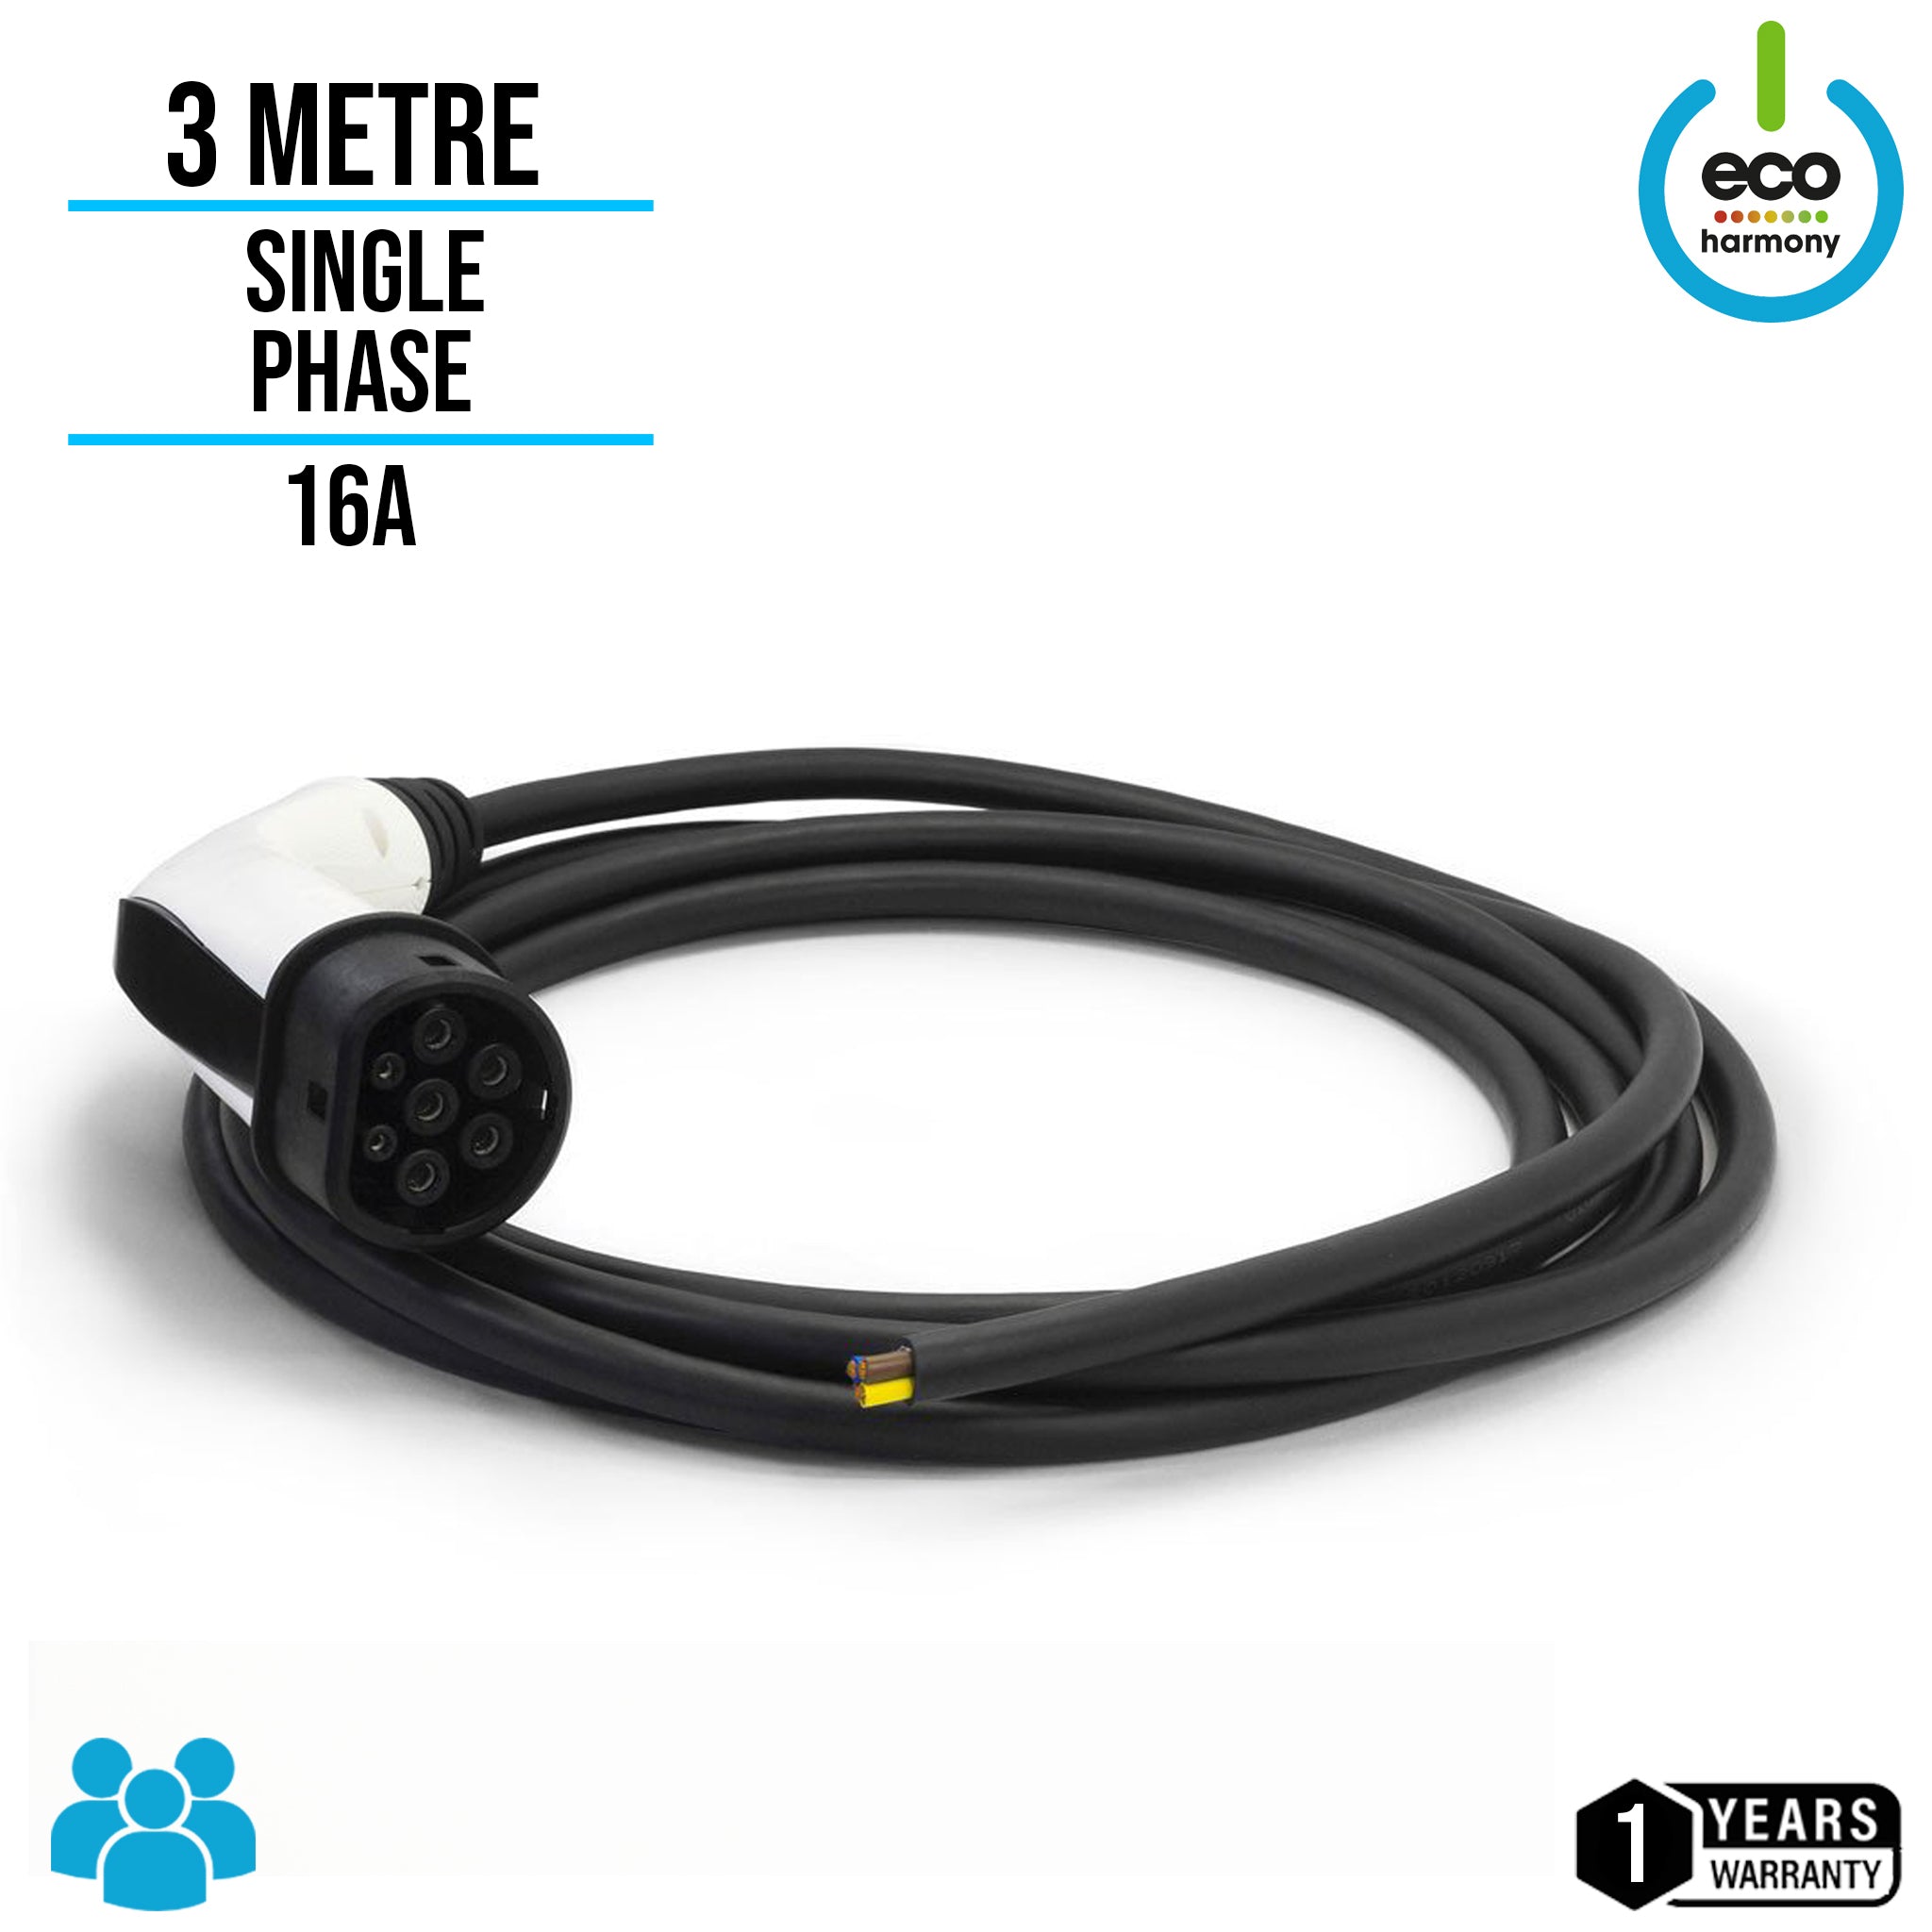 3 Metre Tethered Cable Type 2 16A Female EV Plug + Lead (1-Phase)